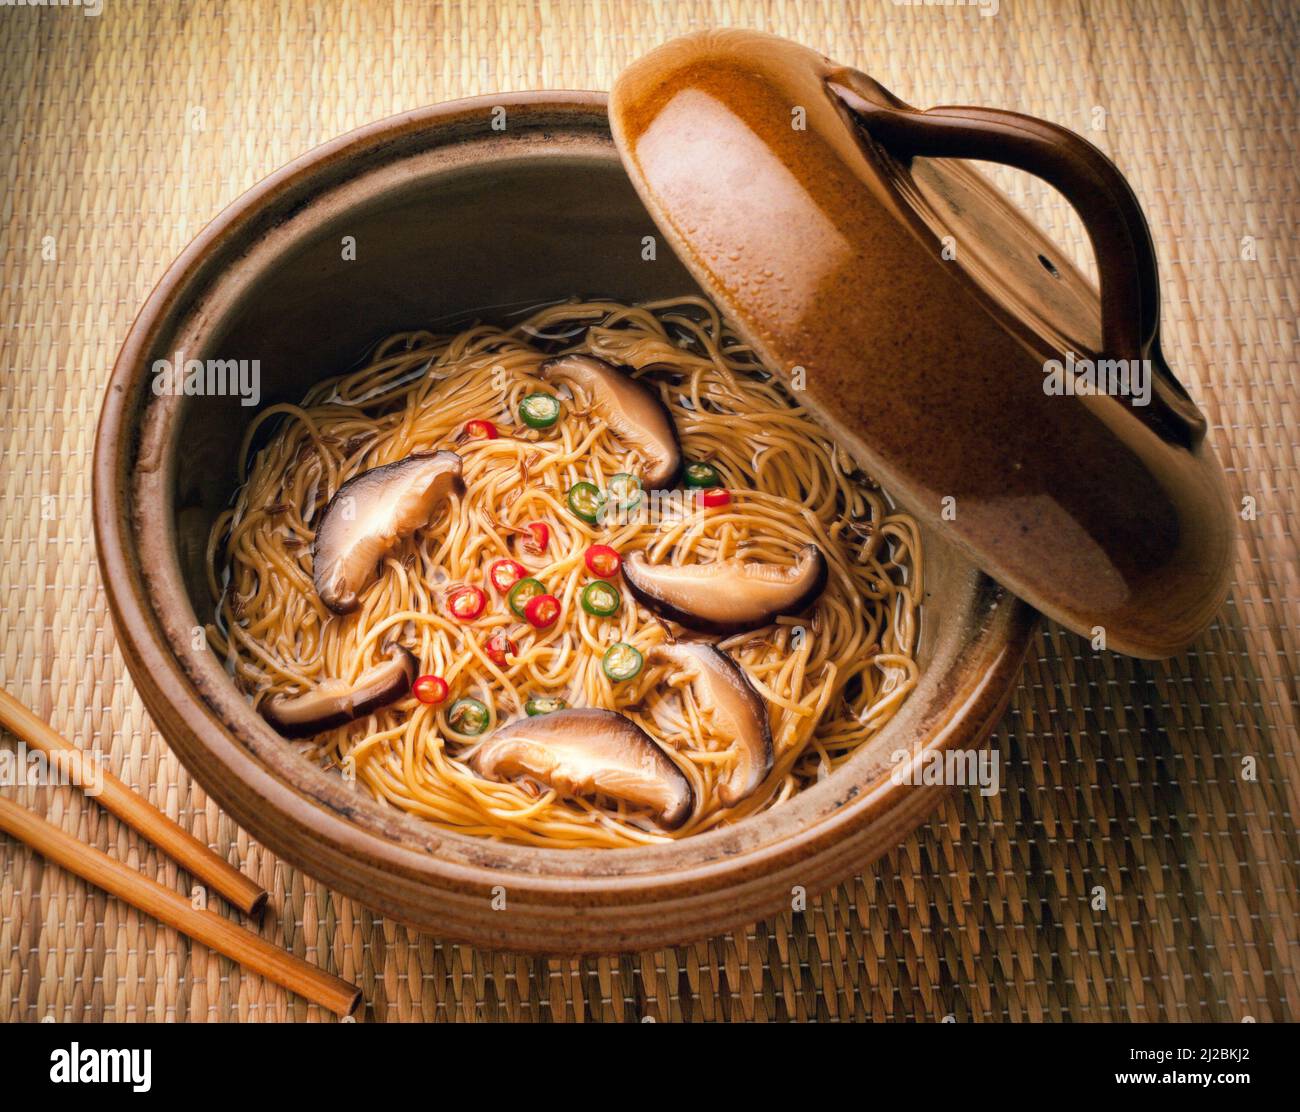 Asian Chinese noodle dish with mushrooms, chilli Stock Photo